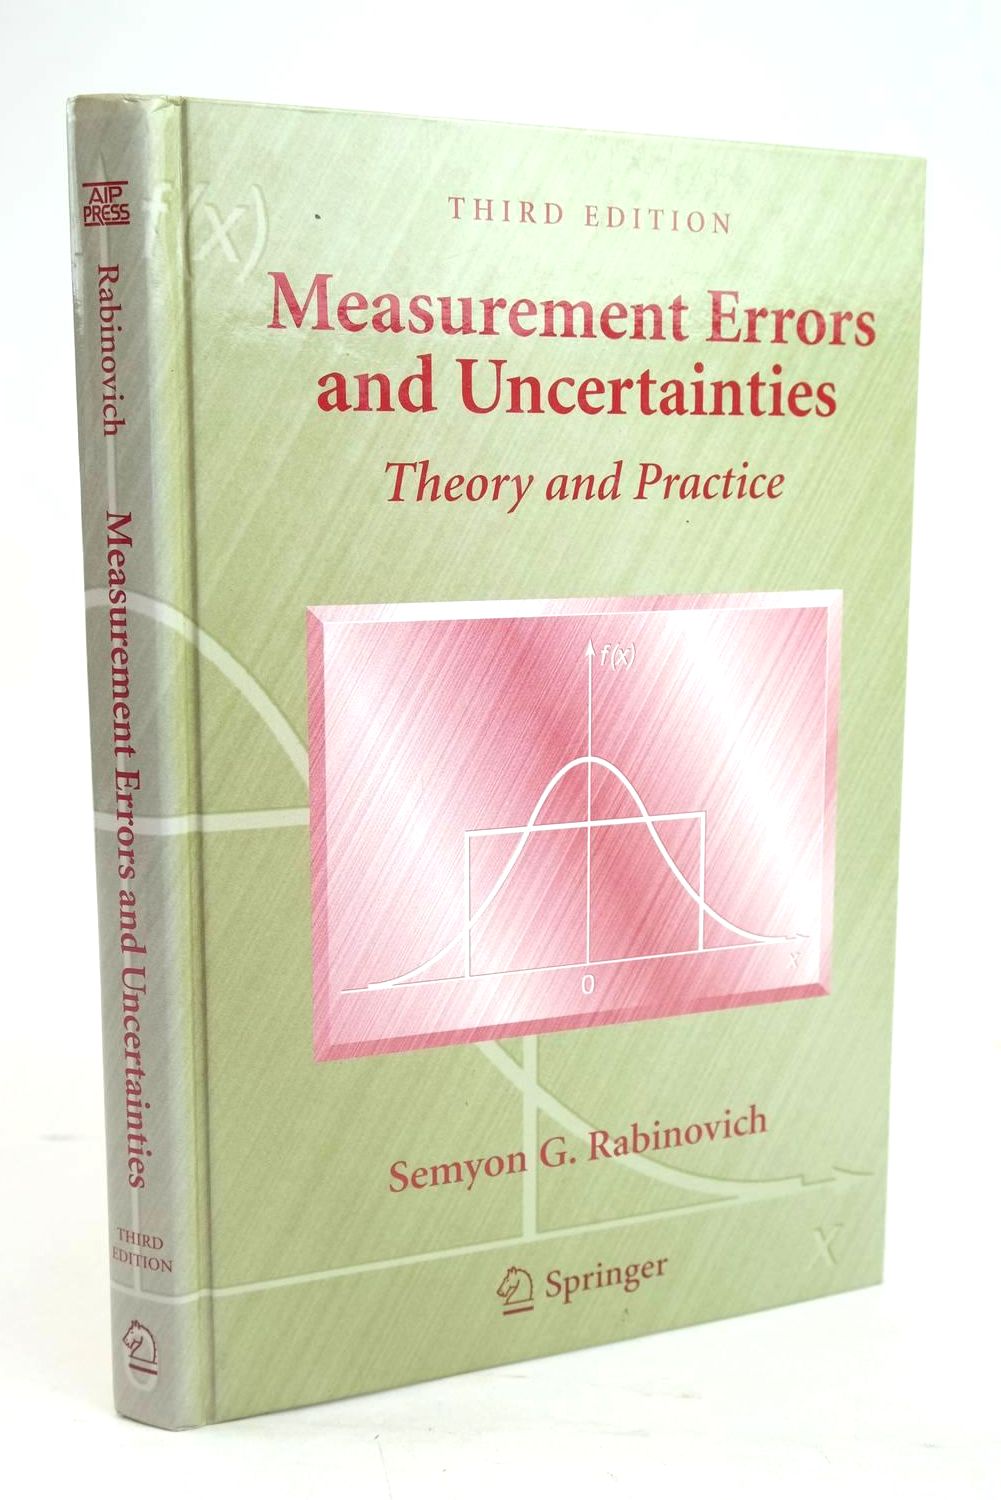 Photo of MEASUREMENT ERRORS AND UNCERTAINTIES - THEORY AND PRACTICE- Stock Number: 1319670